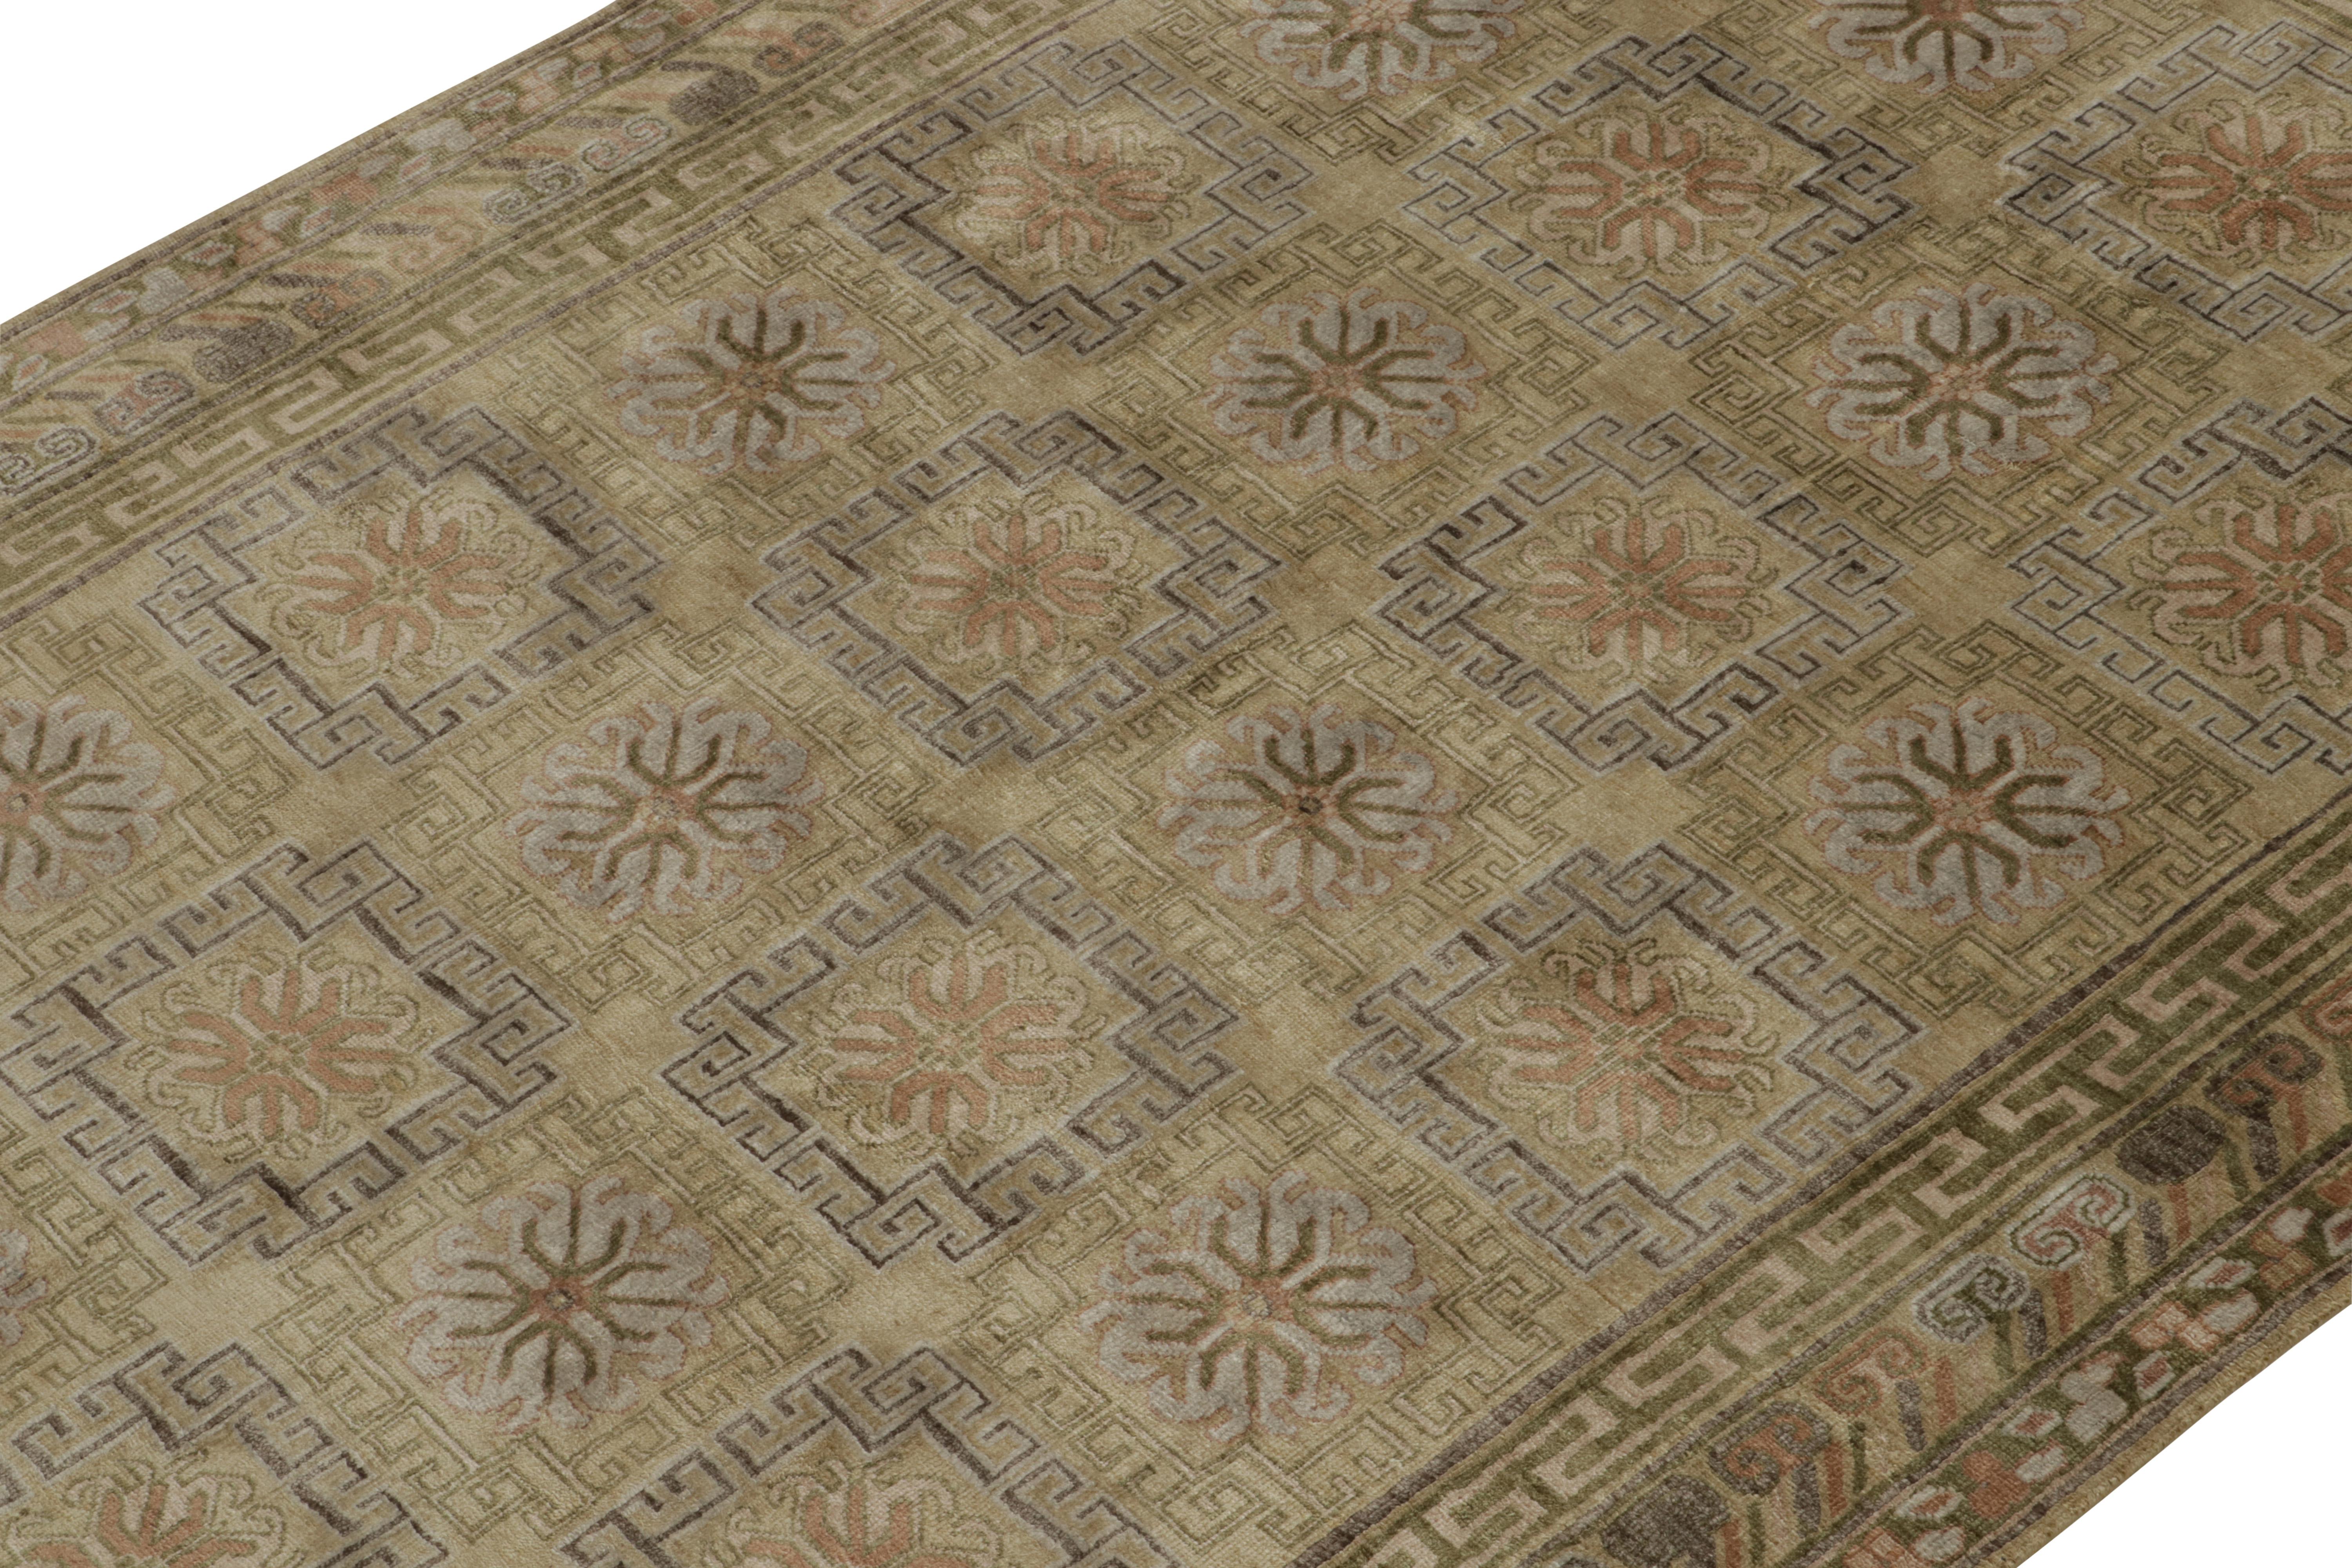 Hand-Knotted Rug & Kilim’s Khotan style rug in Gold and Beige-Brown Geometric Patterns For Sale